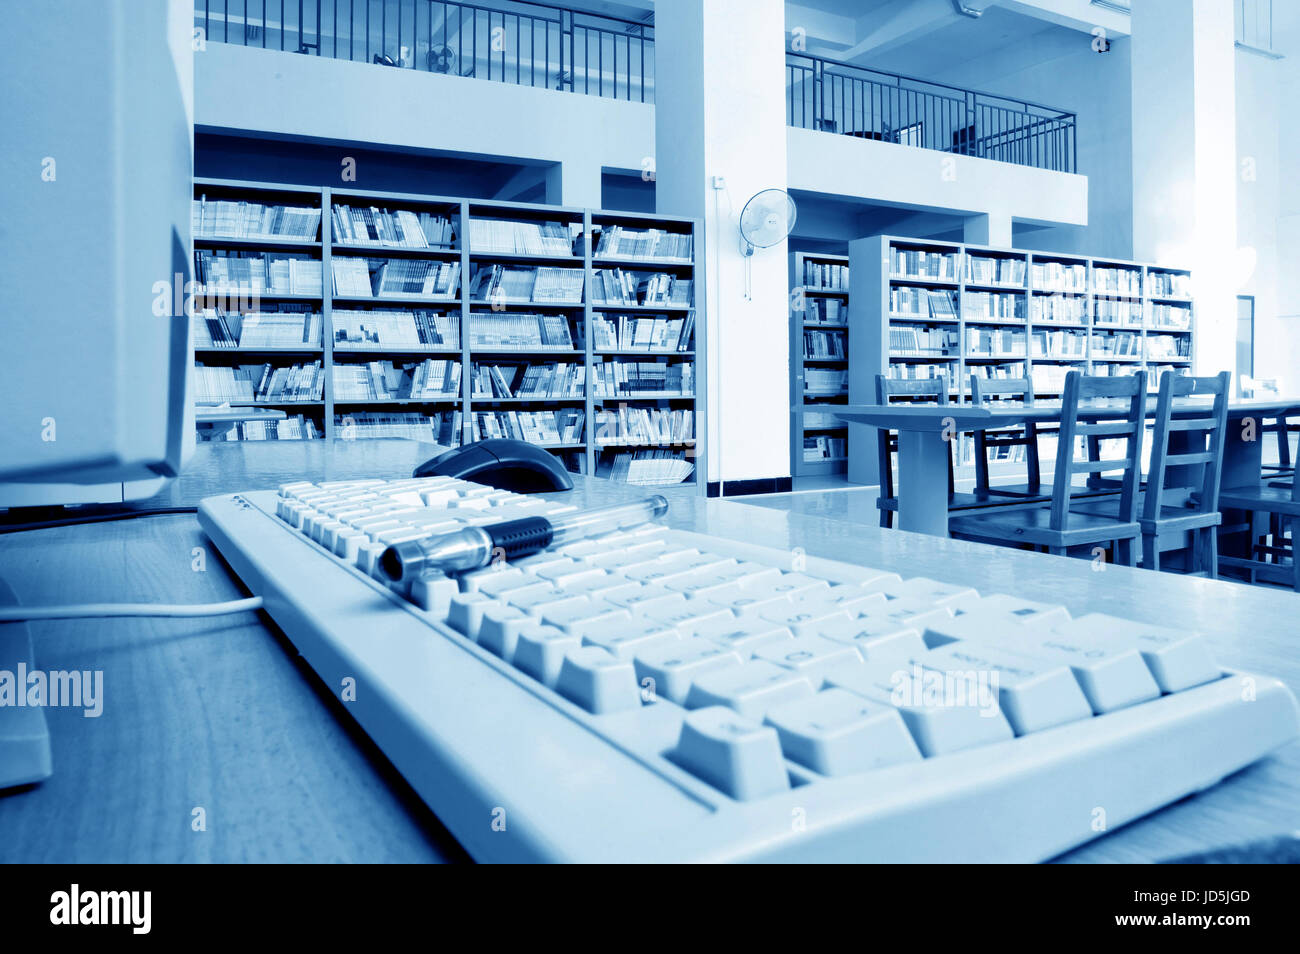 Library shelves, a large number of books. Stock Photo